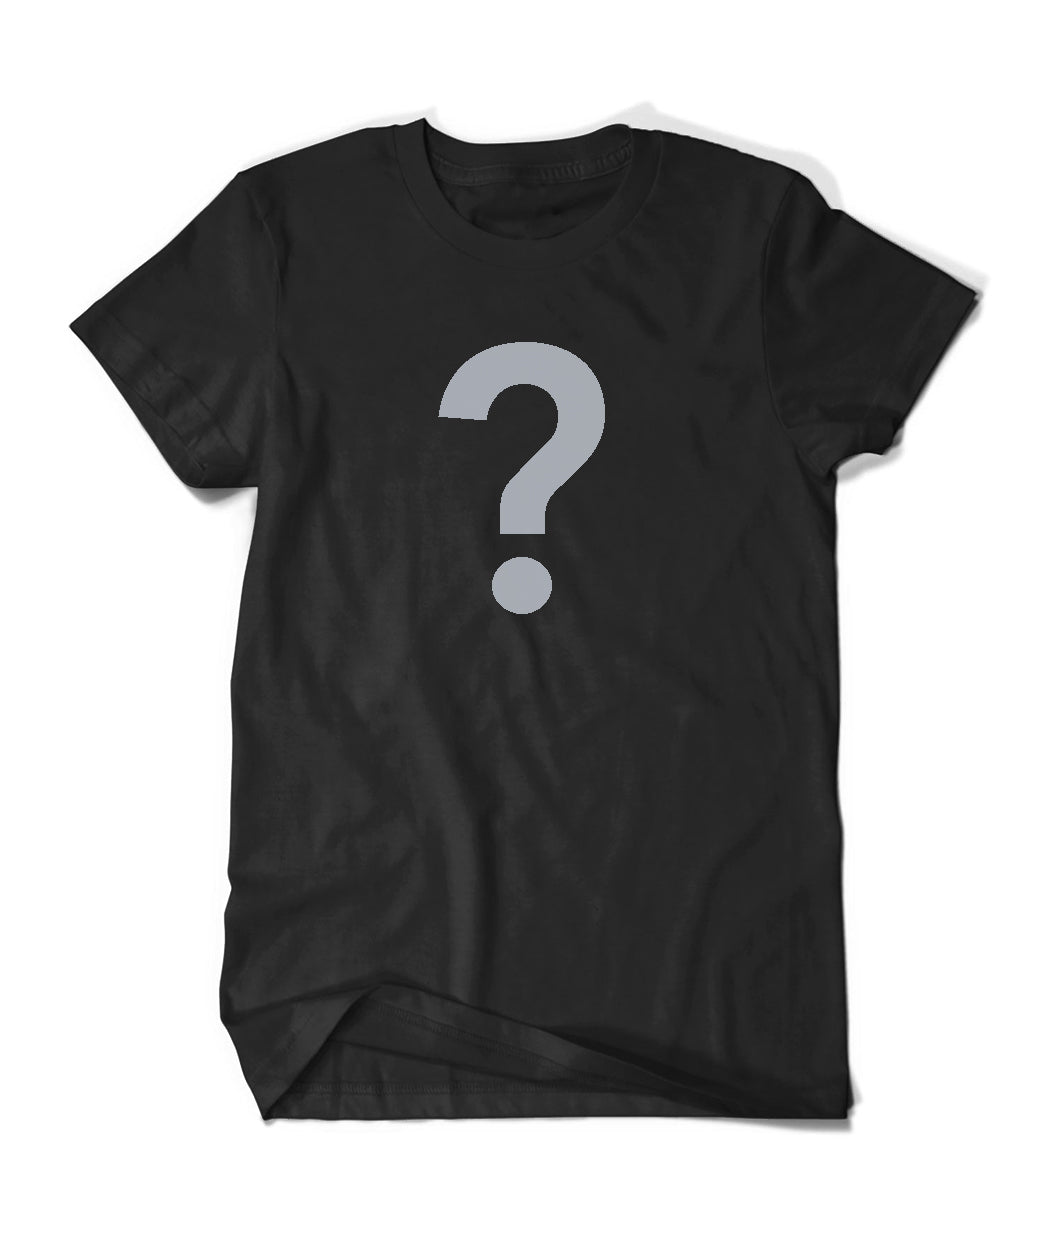 Black shirt with a gray question mark in the center - from the Valleyfolk